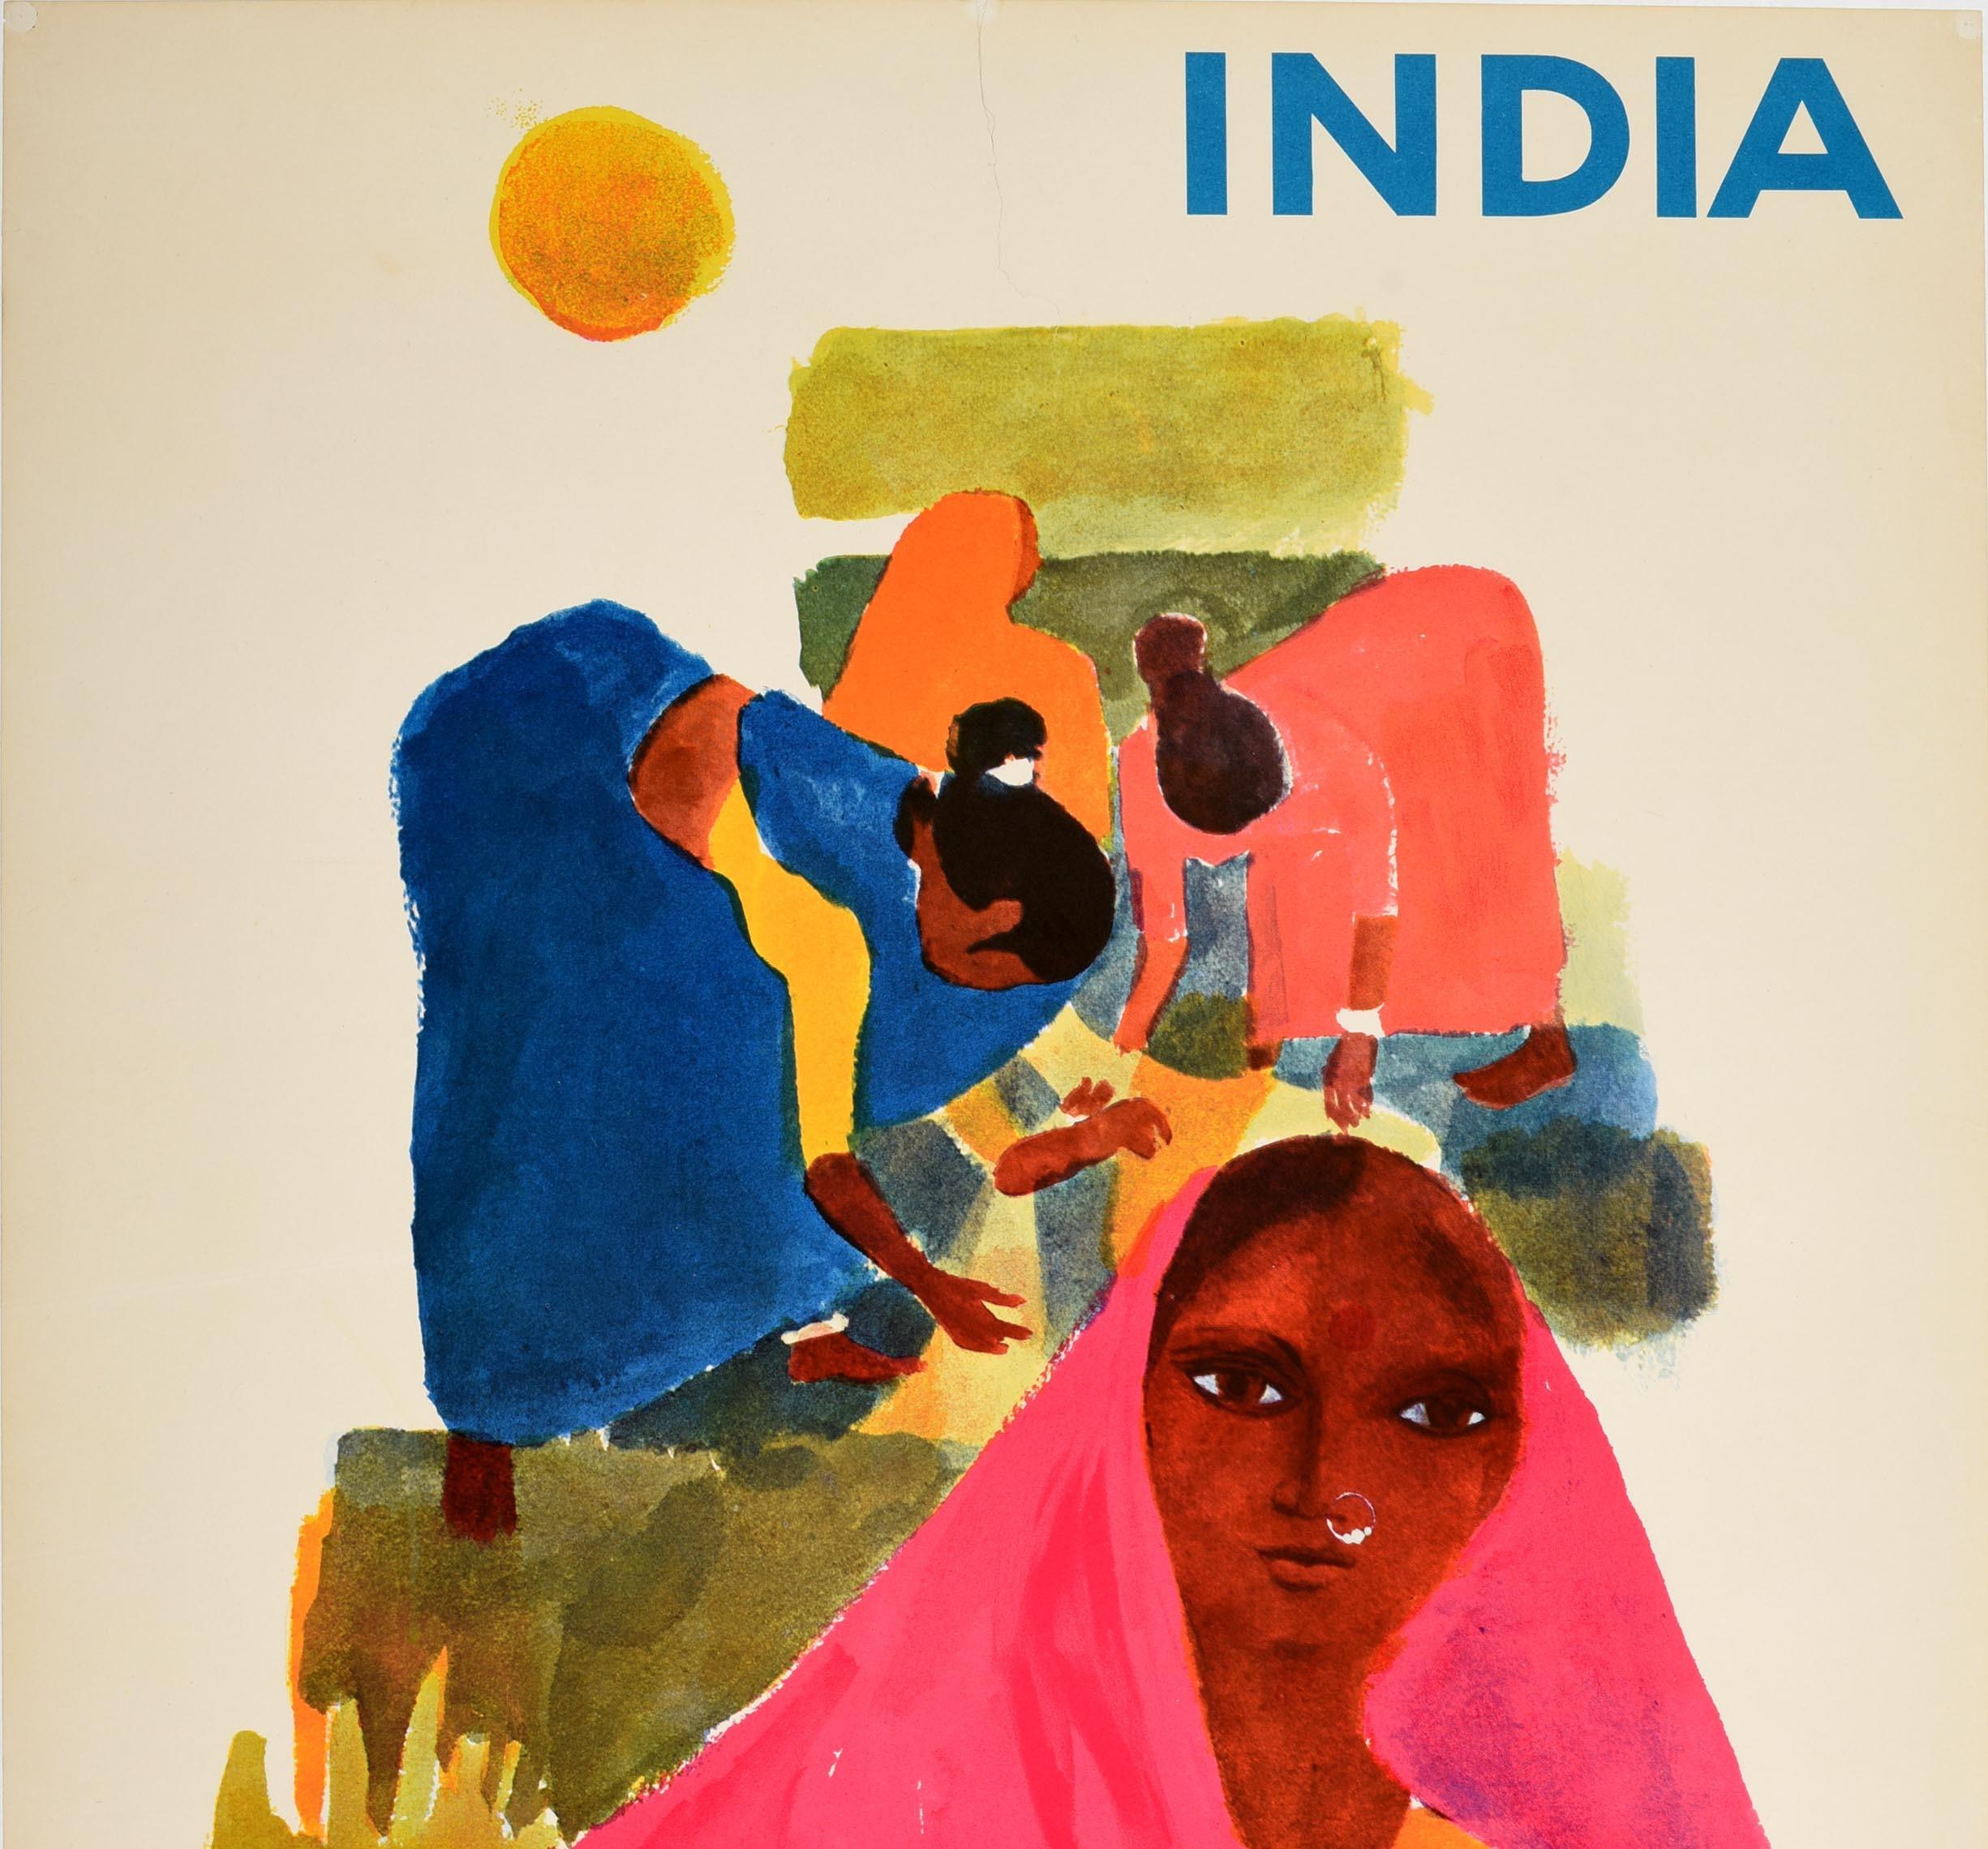 poster on agriculture in india